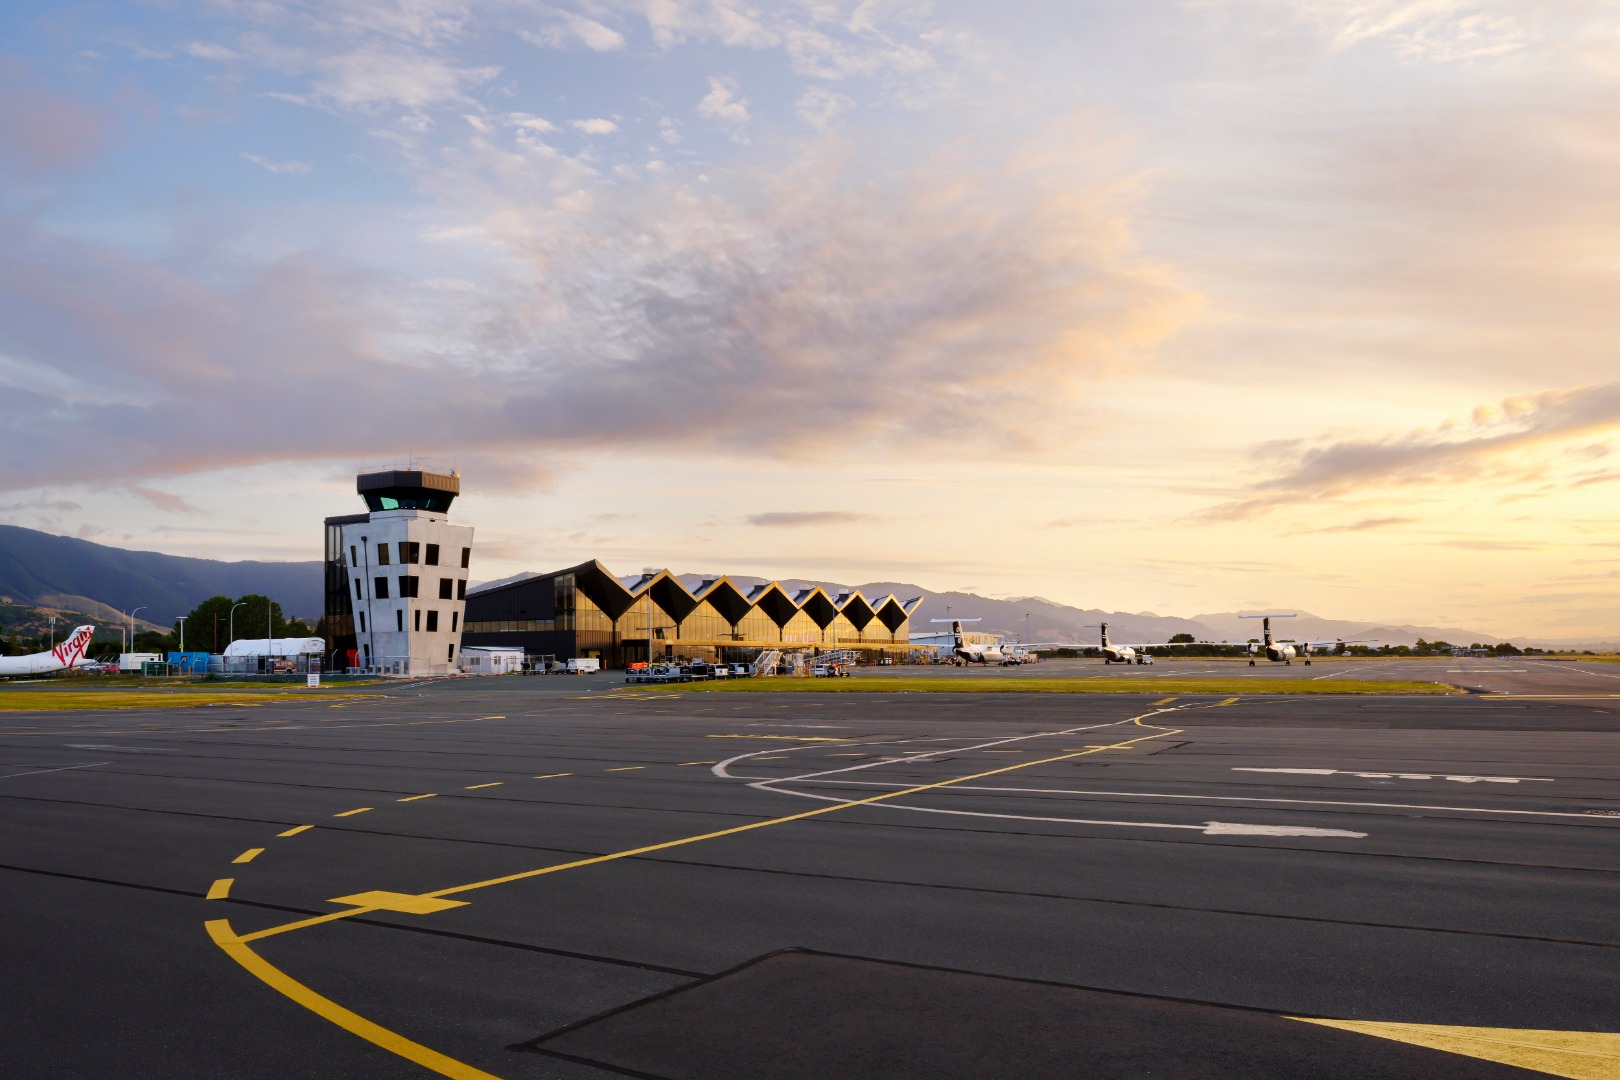 Nelson Airport Terminal, designed by Studio Pacific Architecture, viewed from the airport tarmac.